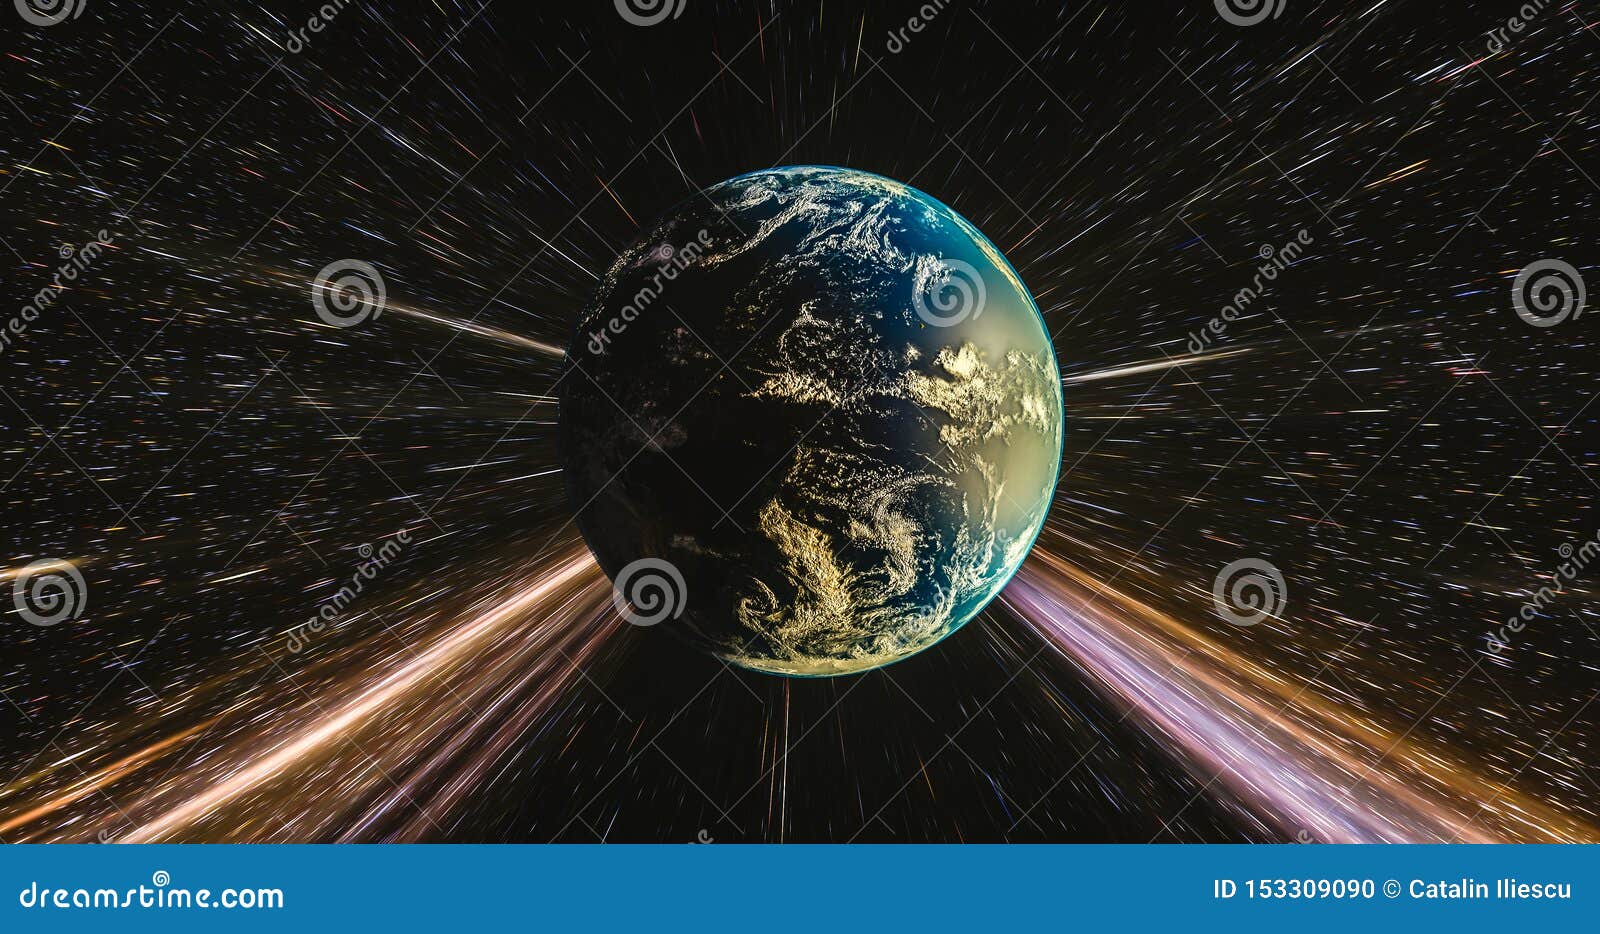 earth traveling though space with light trails of the galaxy